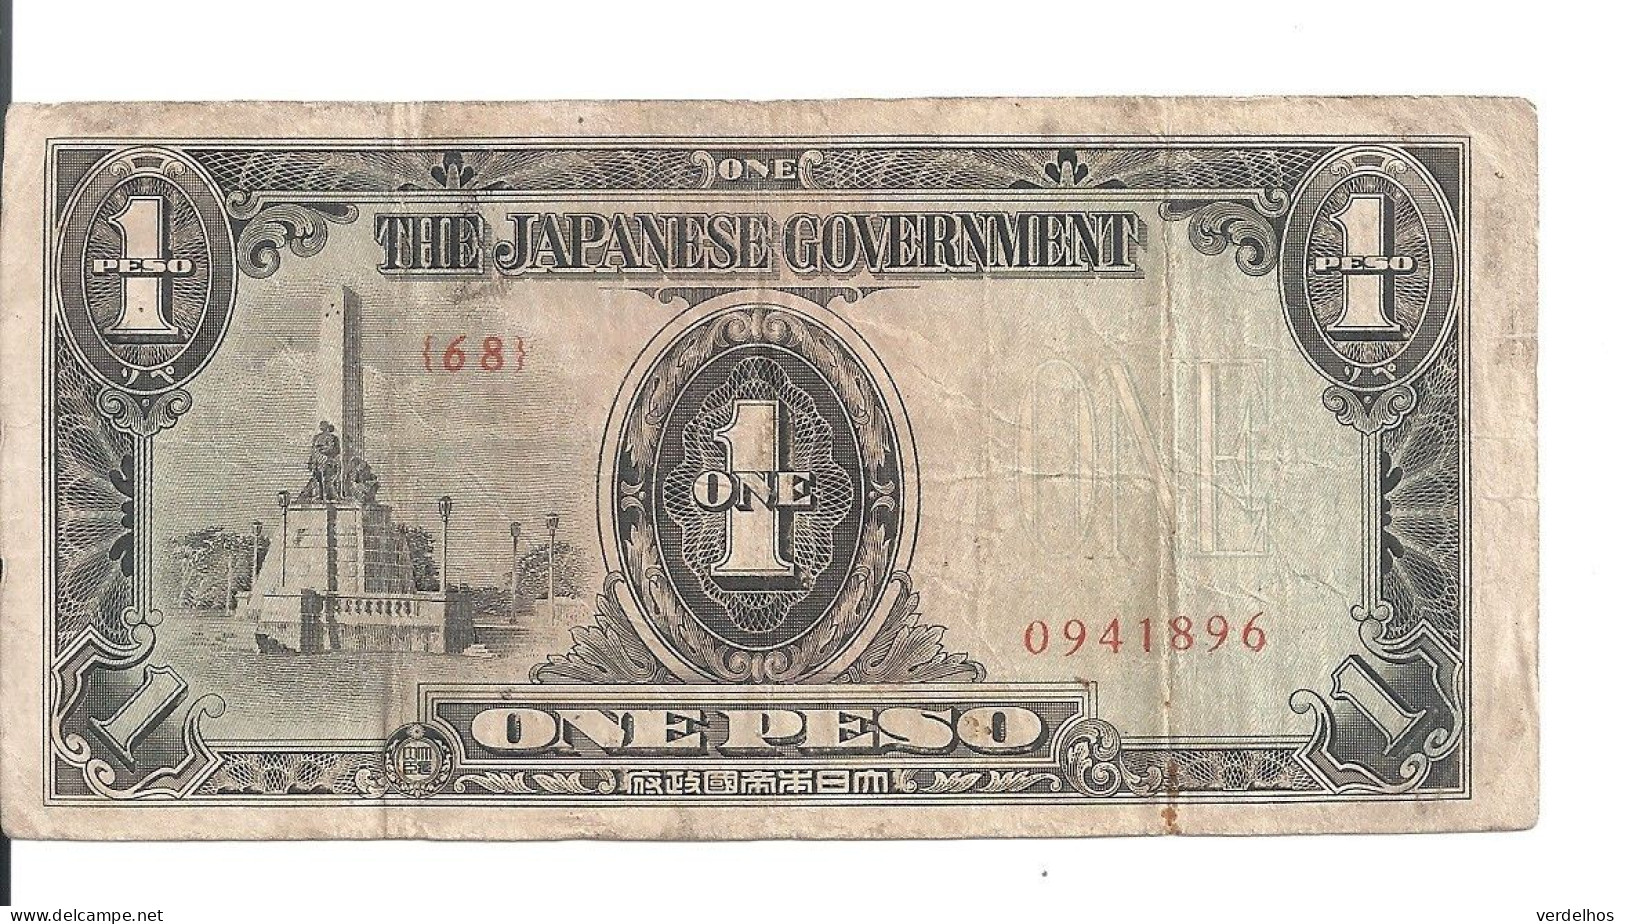 PHILIPPINES ( Japanese Goverment ) 1 PESO ND1943 VF - Filipinas